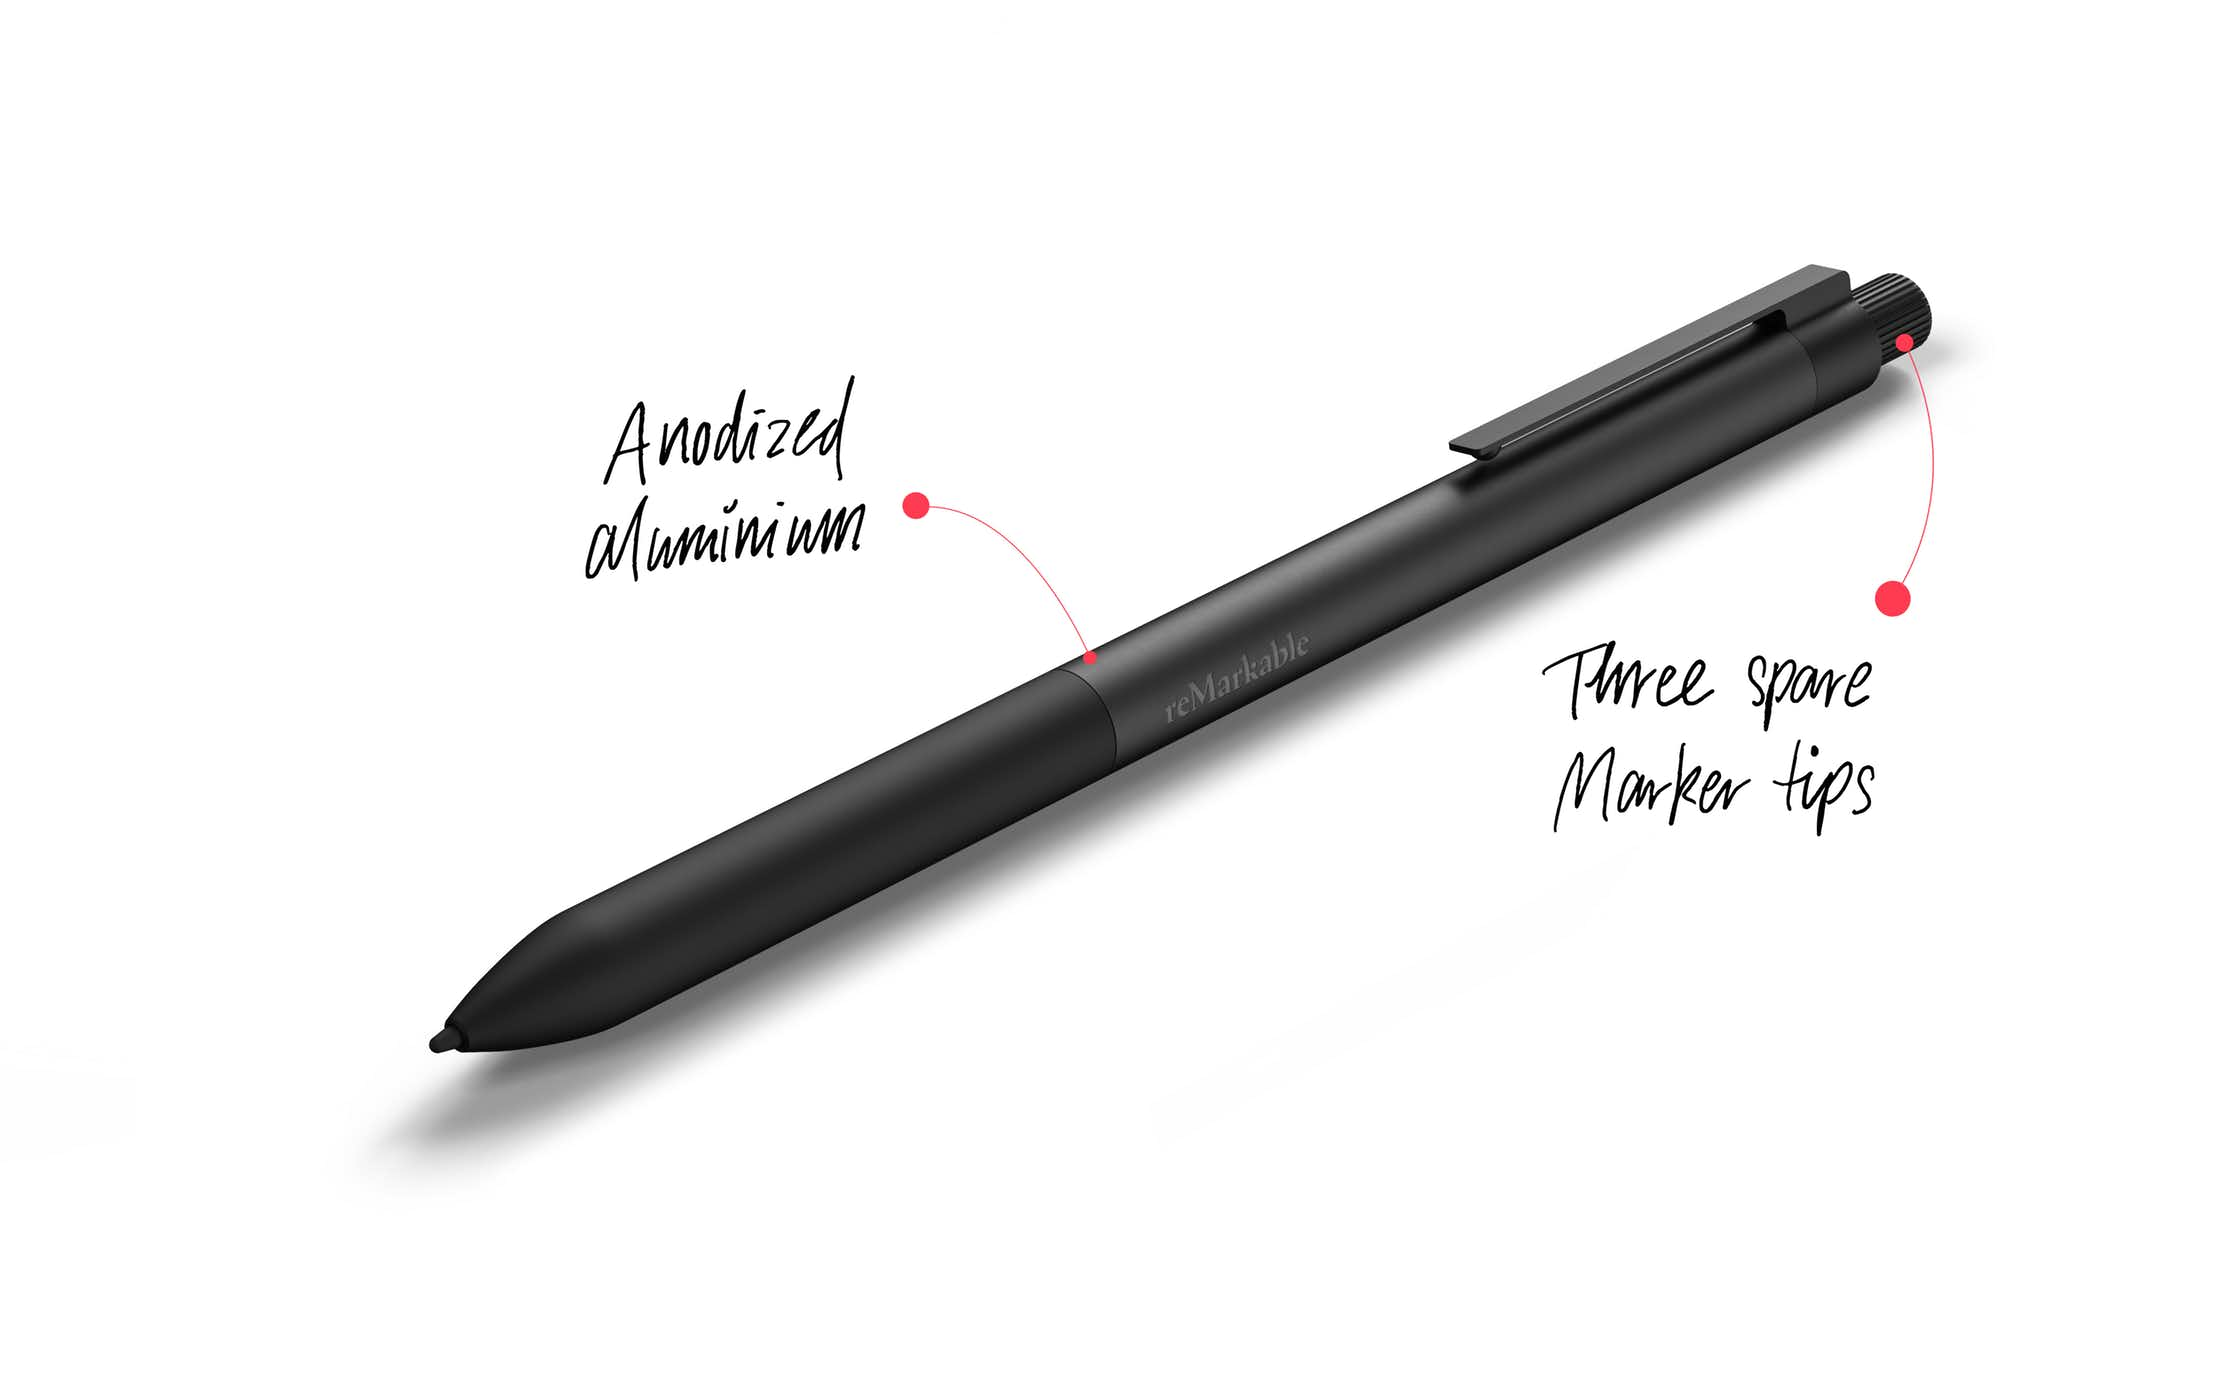 Meet the Marker Signature — our finest writing instrument yet